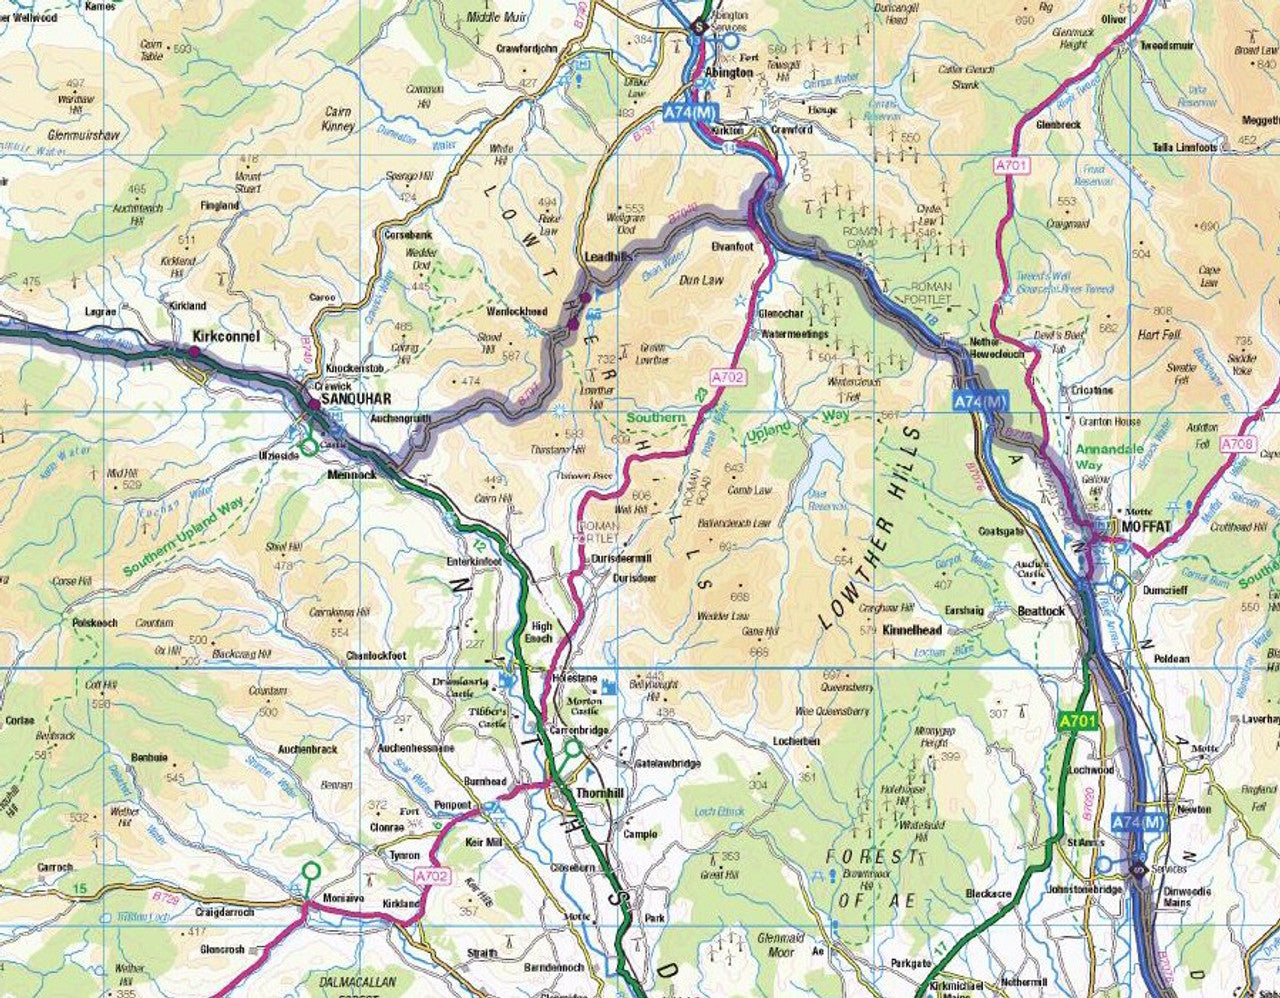 South West Coastal 300 Route Map - Digital Download